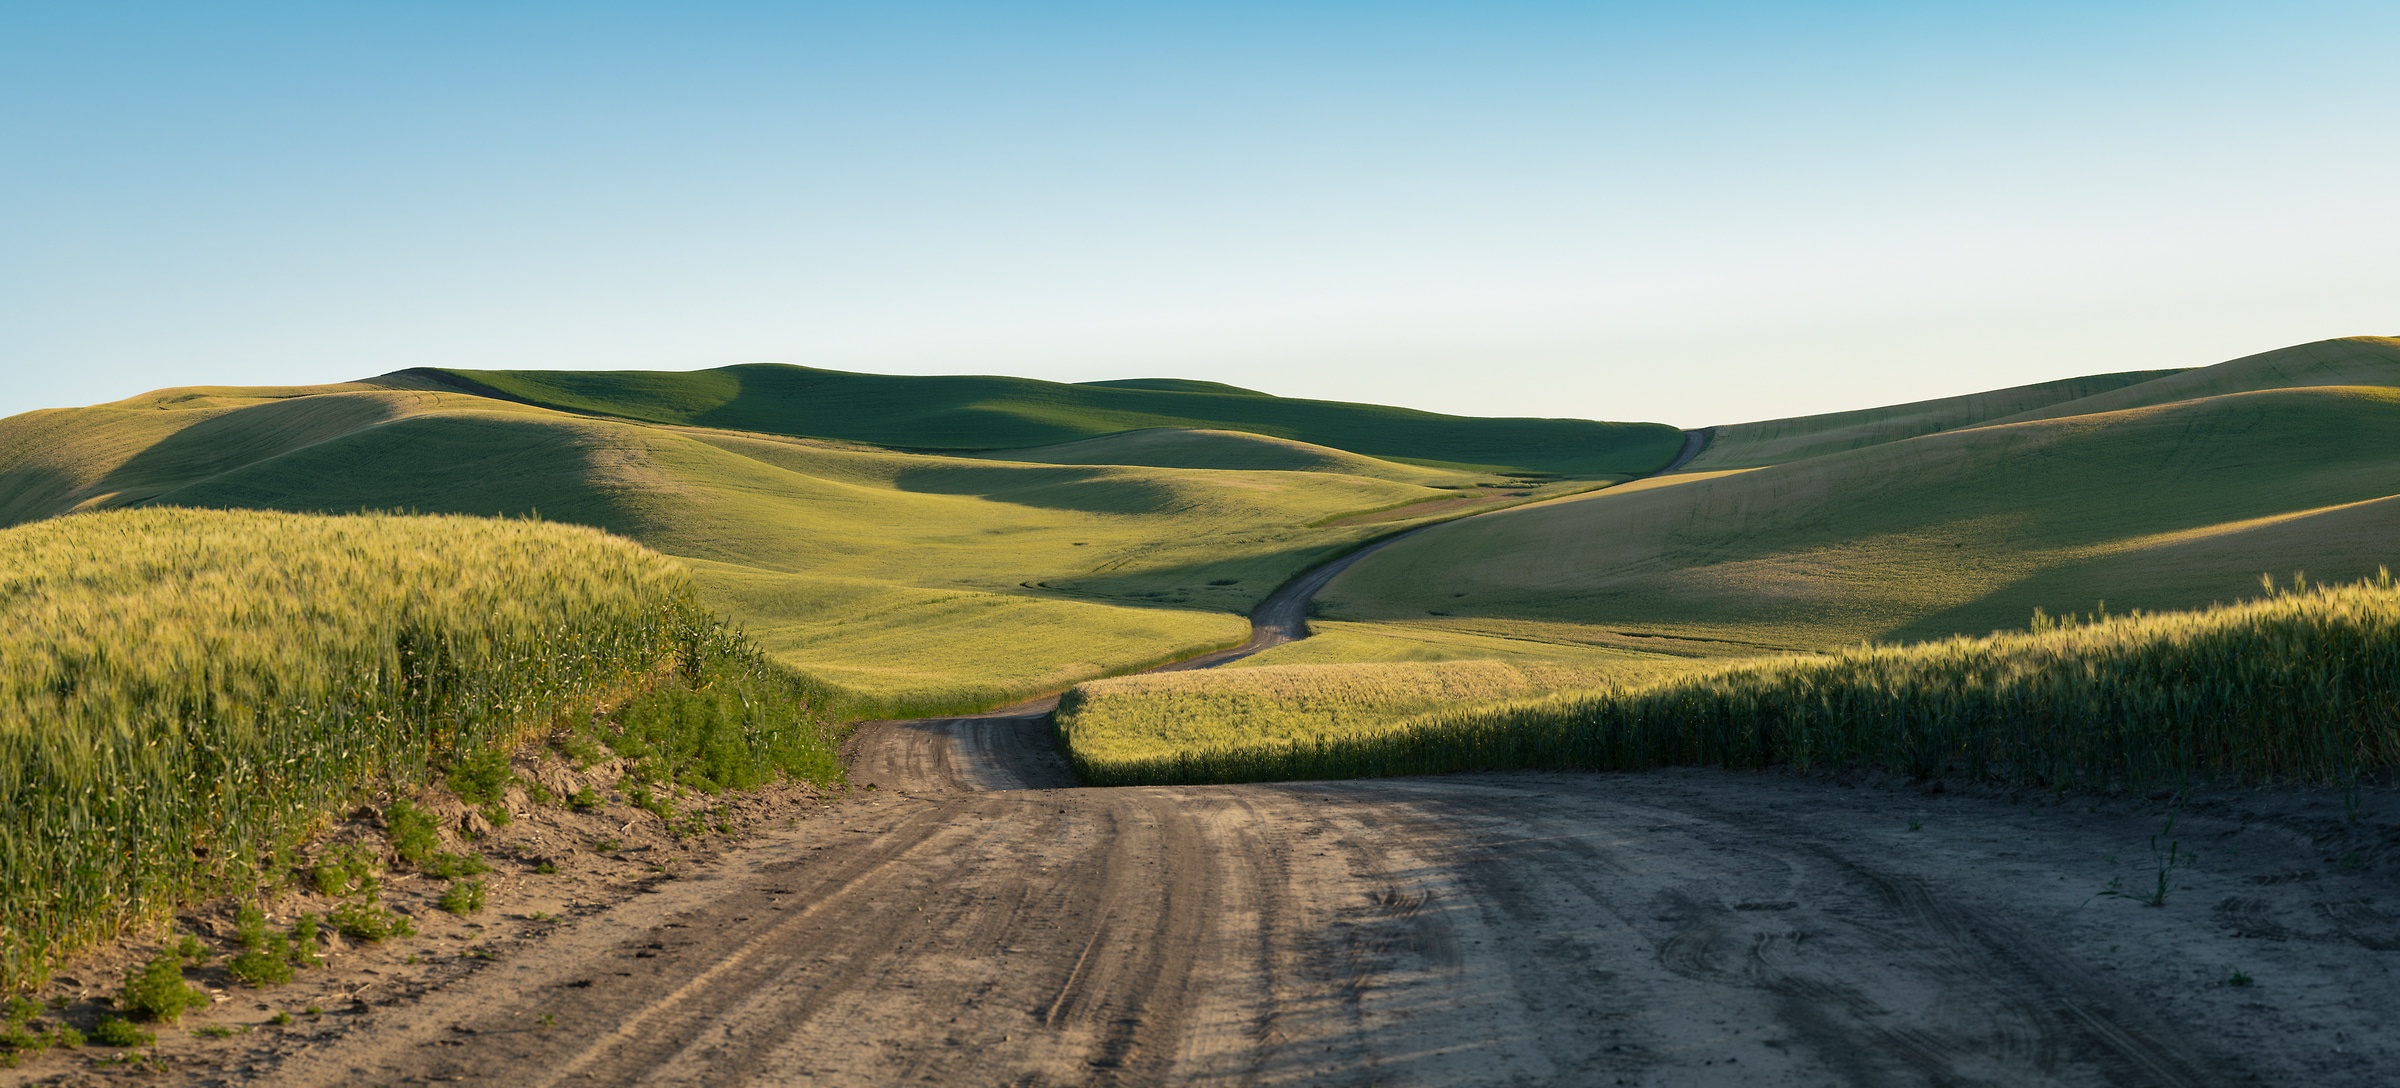 280 megapixels! A very high resolution, large-format VAST photo print of a dirt road going through hills of wheat fields; landscape photograph created by Greg Probst in Palouse, Washington